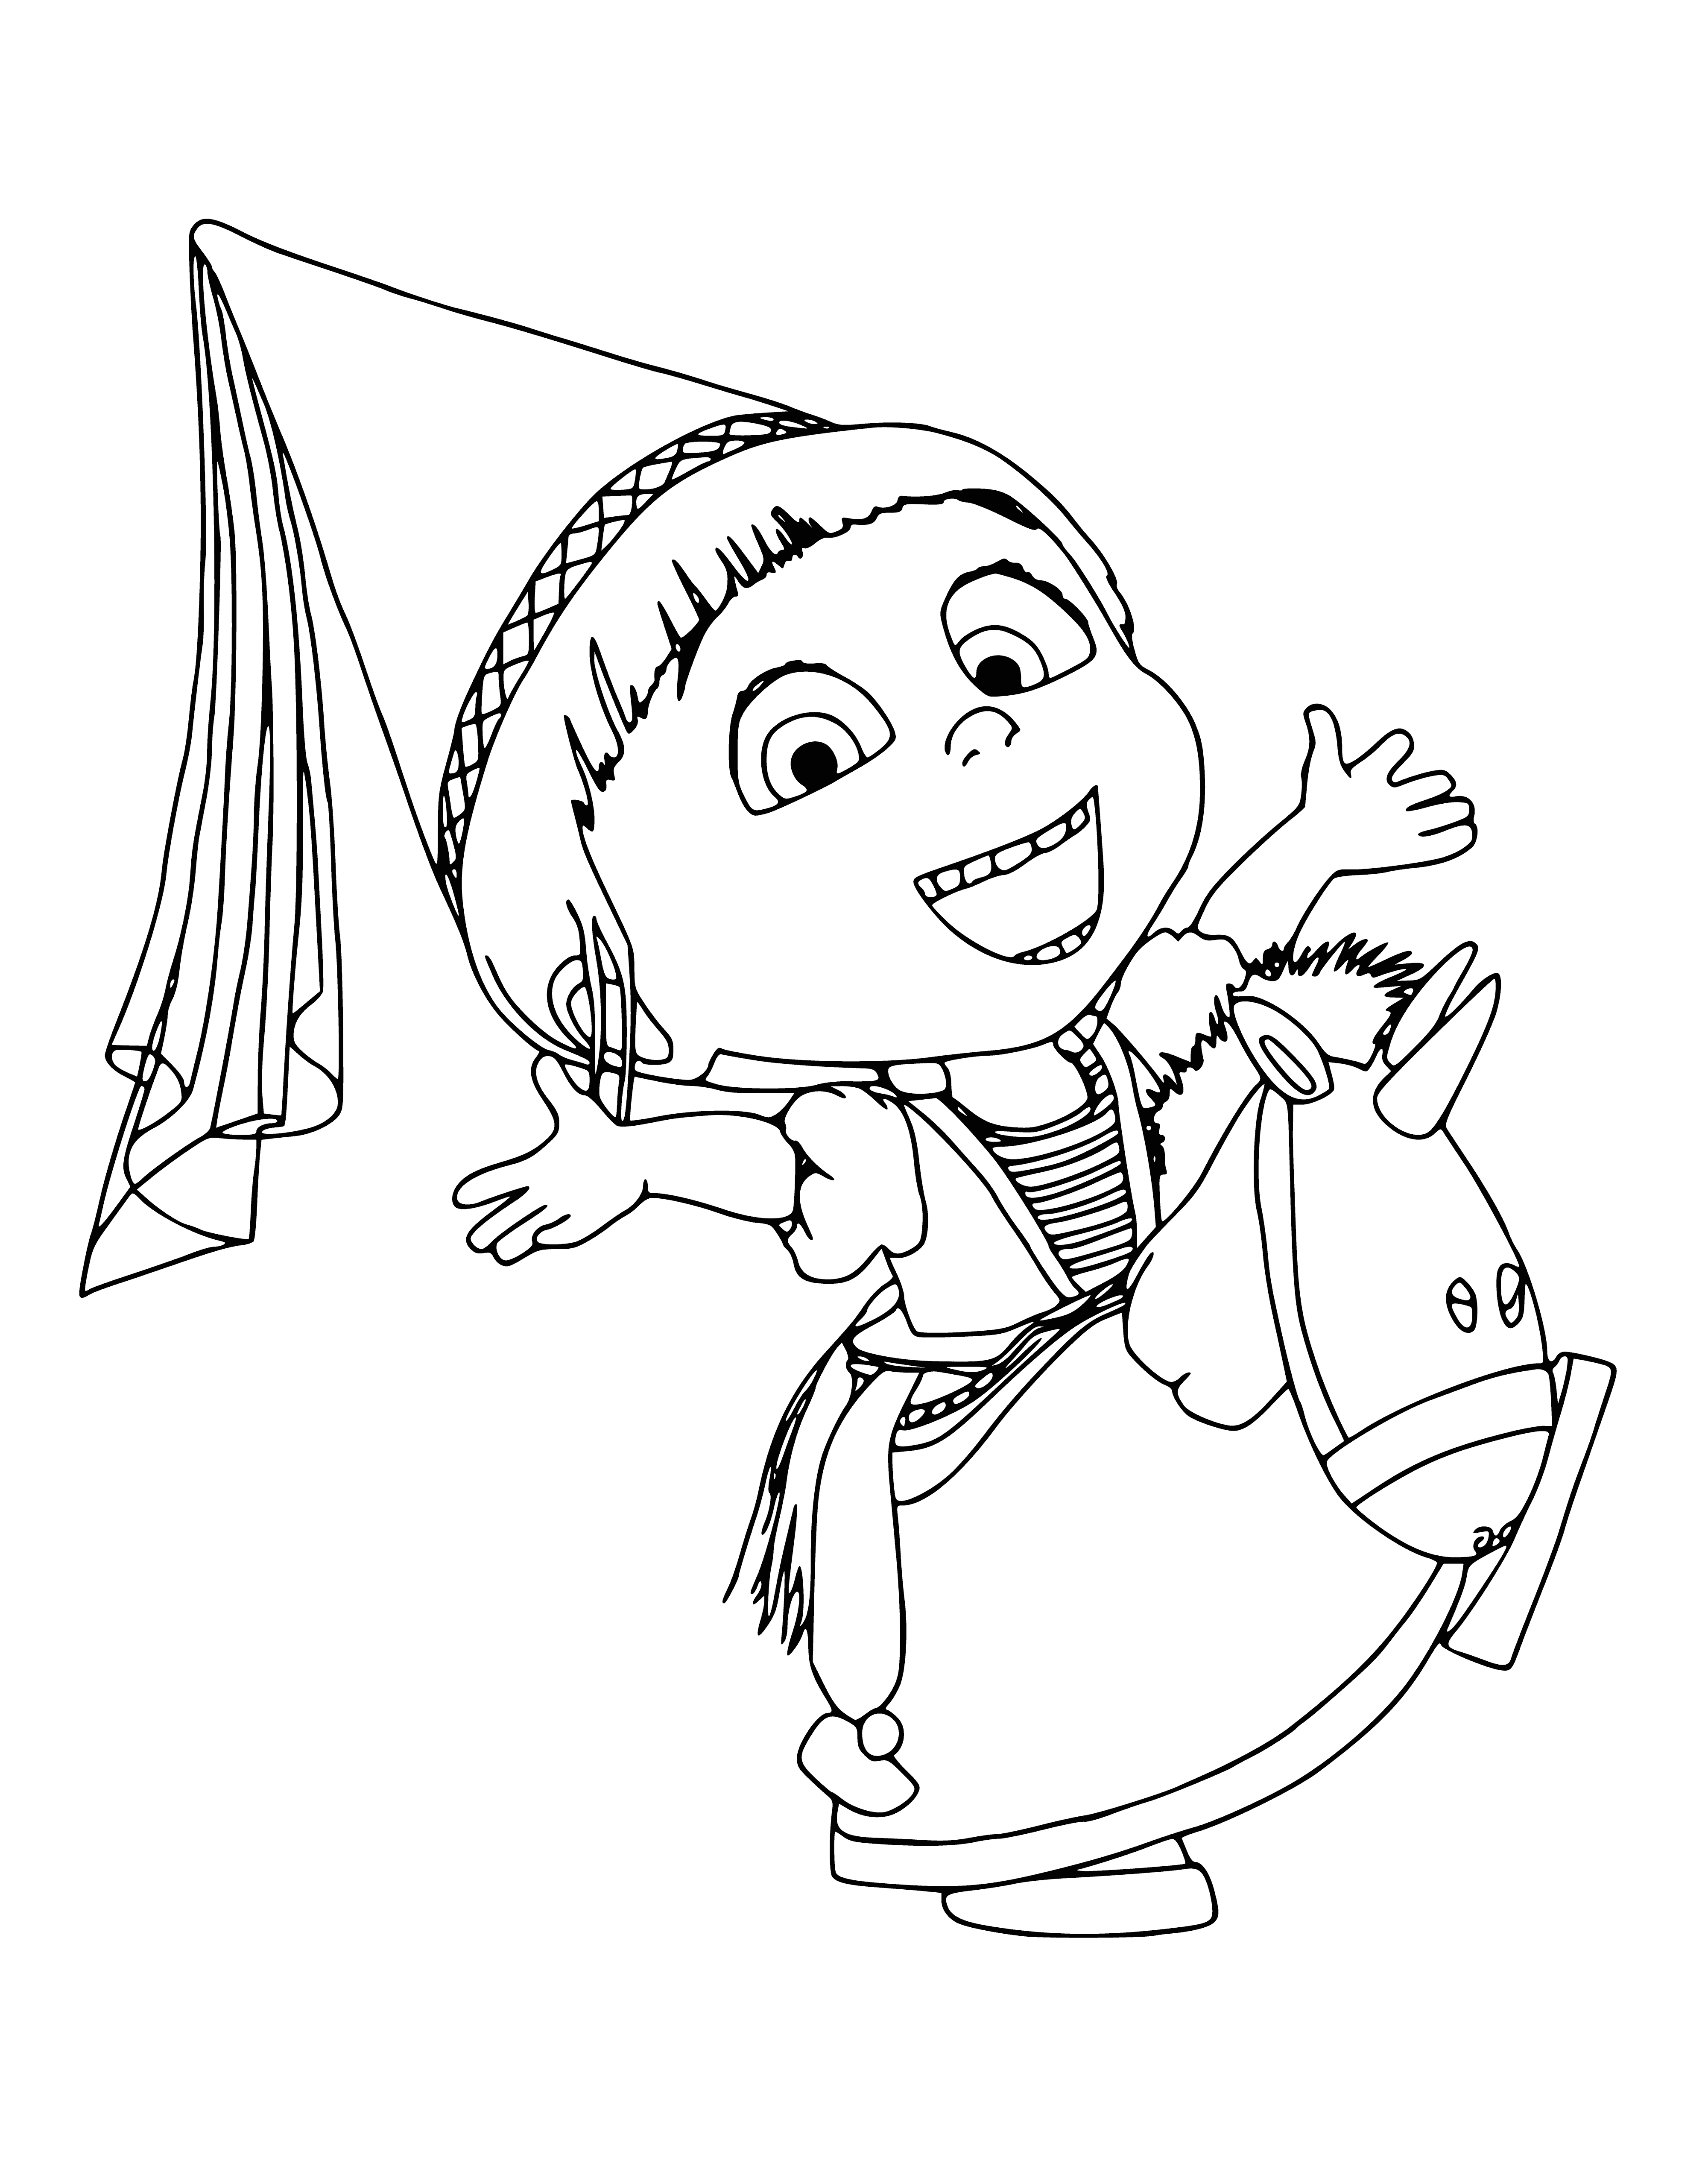 coloring page: Little girl Agnes in a purple dress with a white collar, big bow, and holding a stuffed animal.